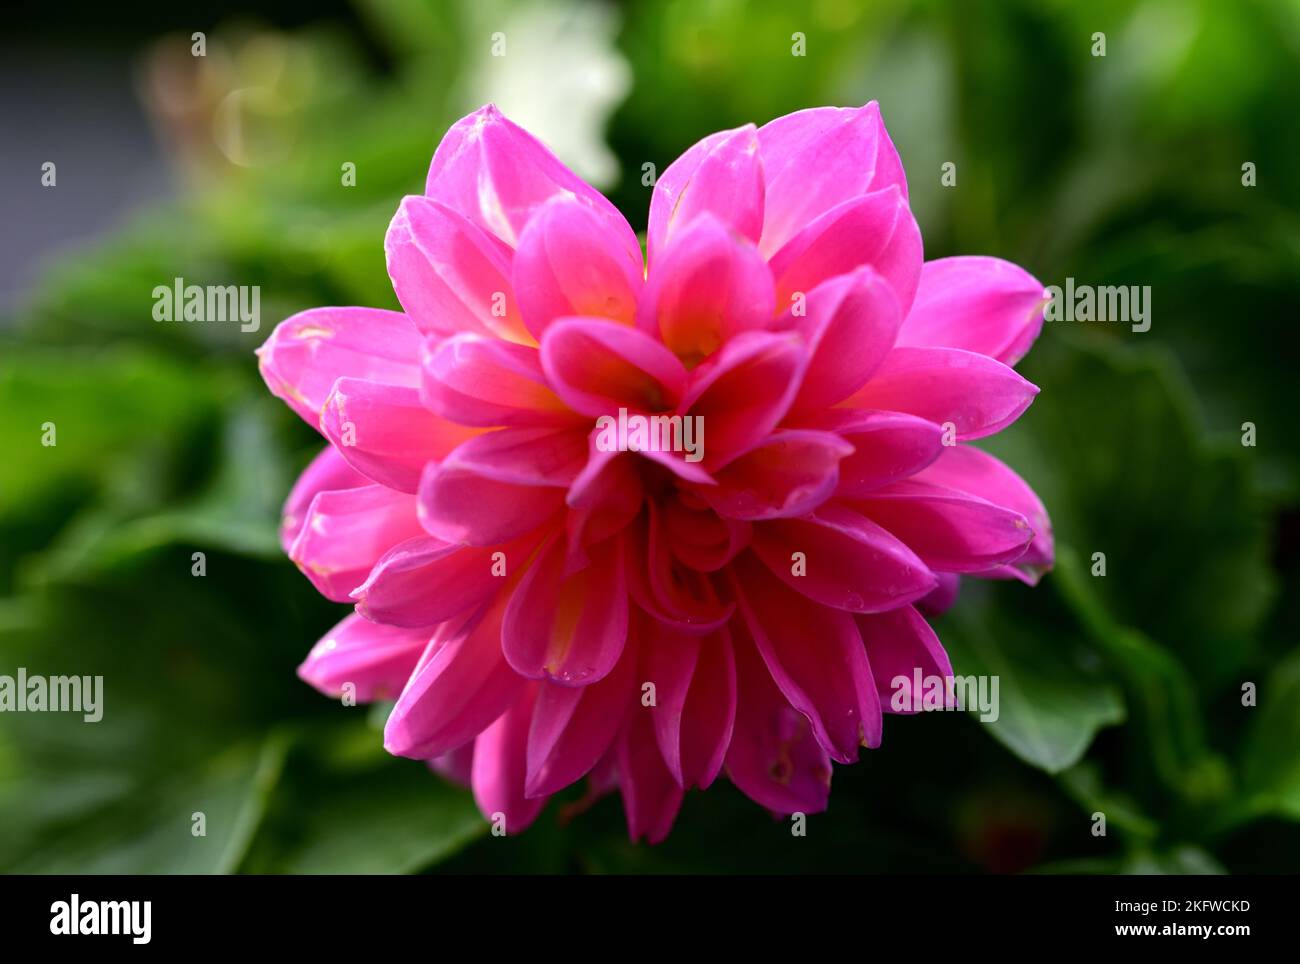 A magnificent pink flower with many petals Stock Photo